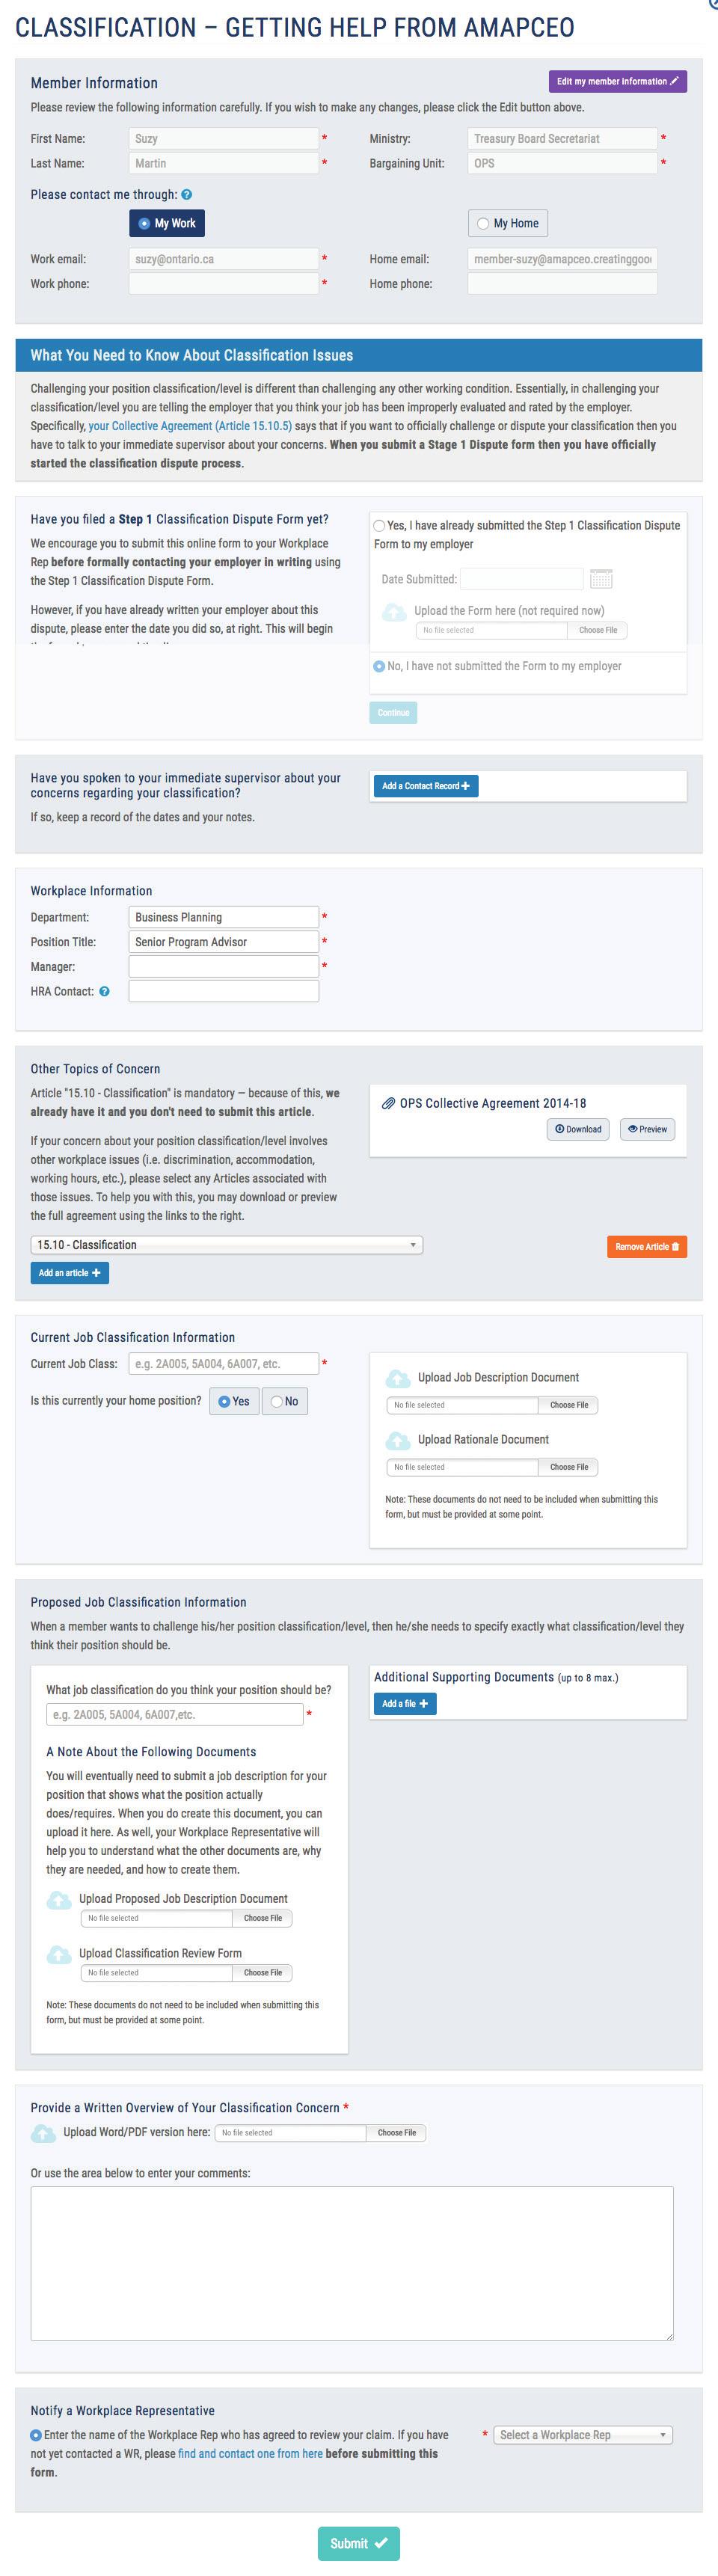 For Members: Completing the Form (Classification) SELECTING DISPUTED ARTICLES Use the dropdown and Add Article button together to add as many Collective Agreement articles as you wish that are